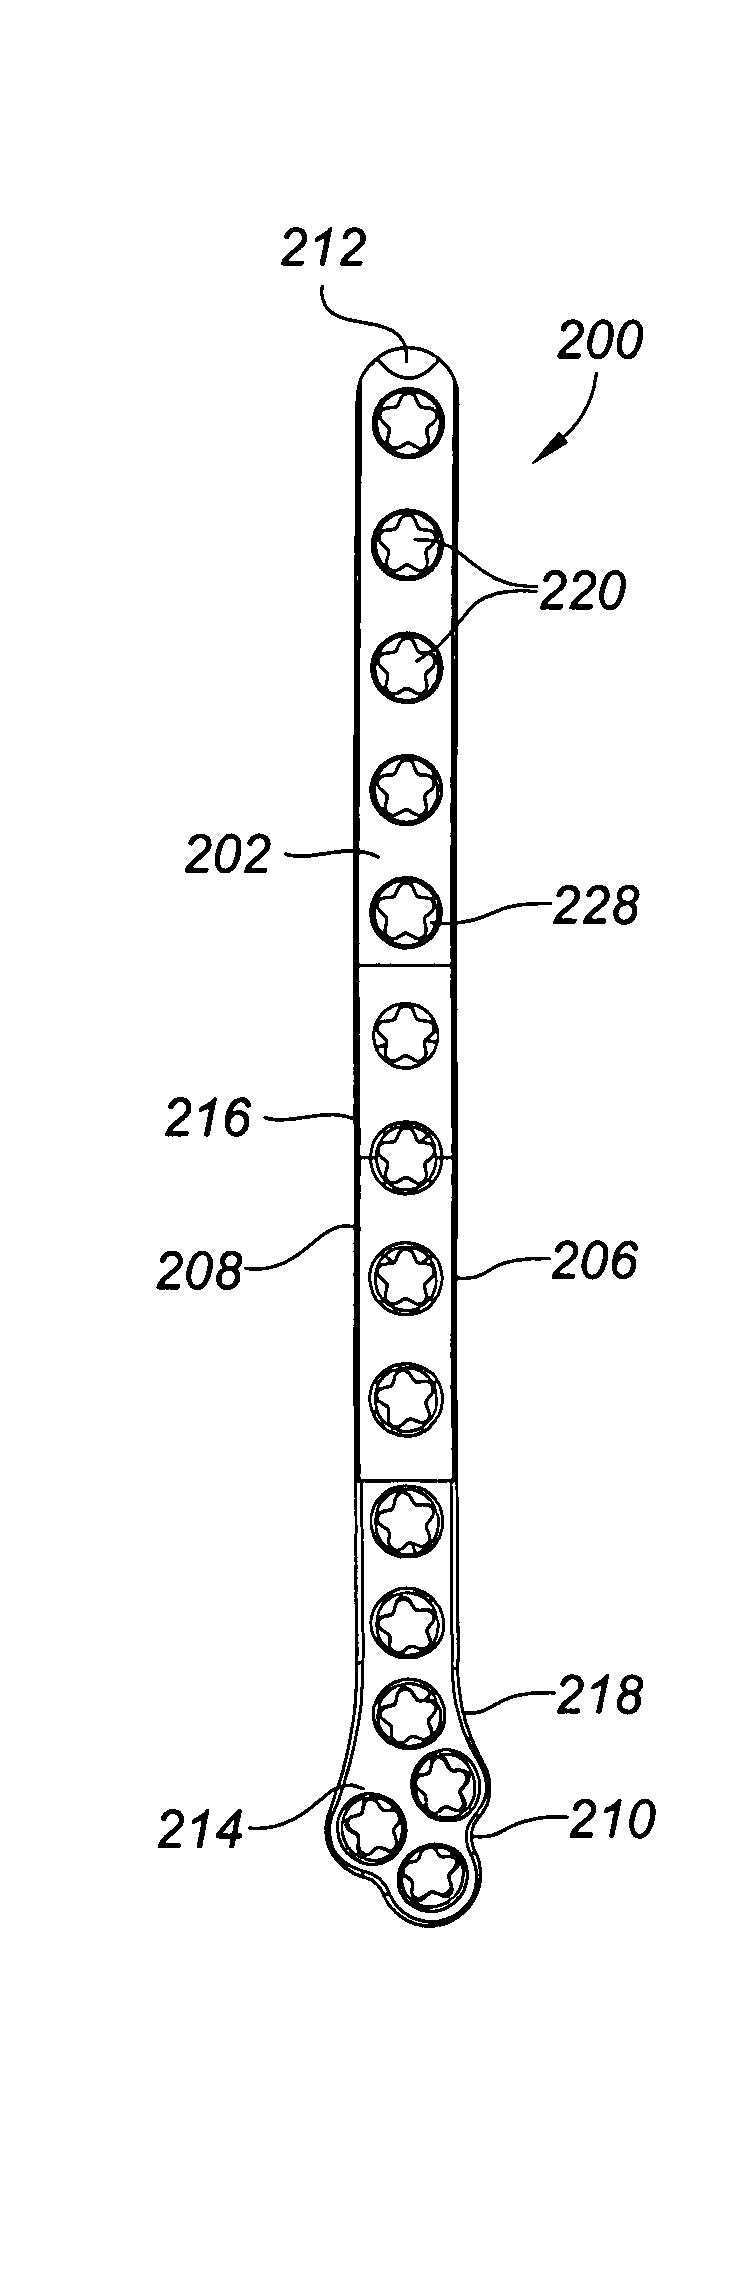 Systems and methods for using polyaxial plates